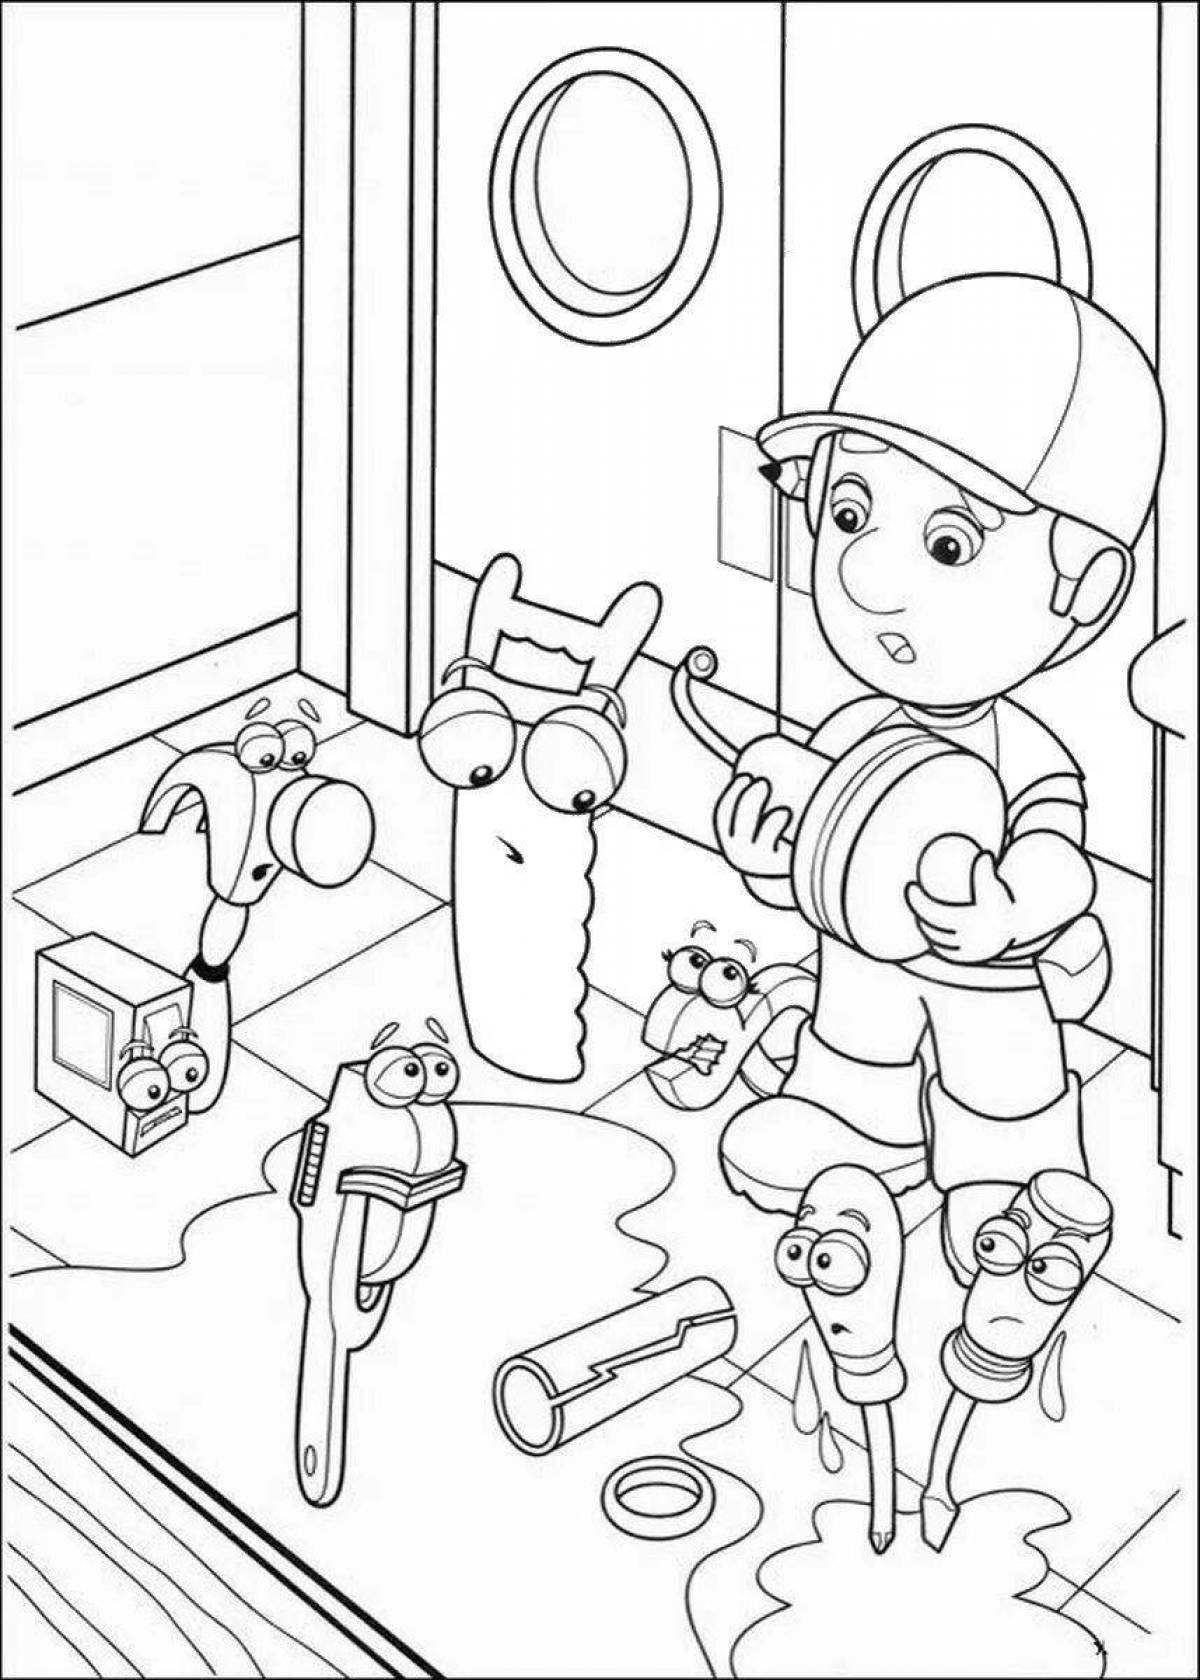 Playful cog coloring page for kids